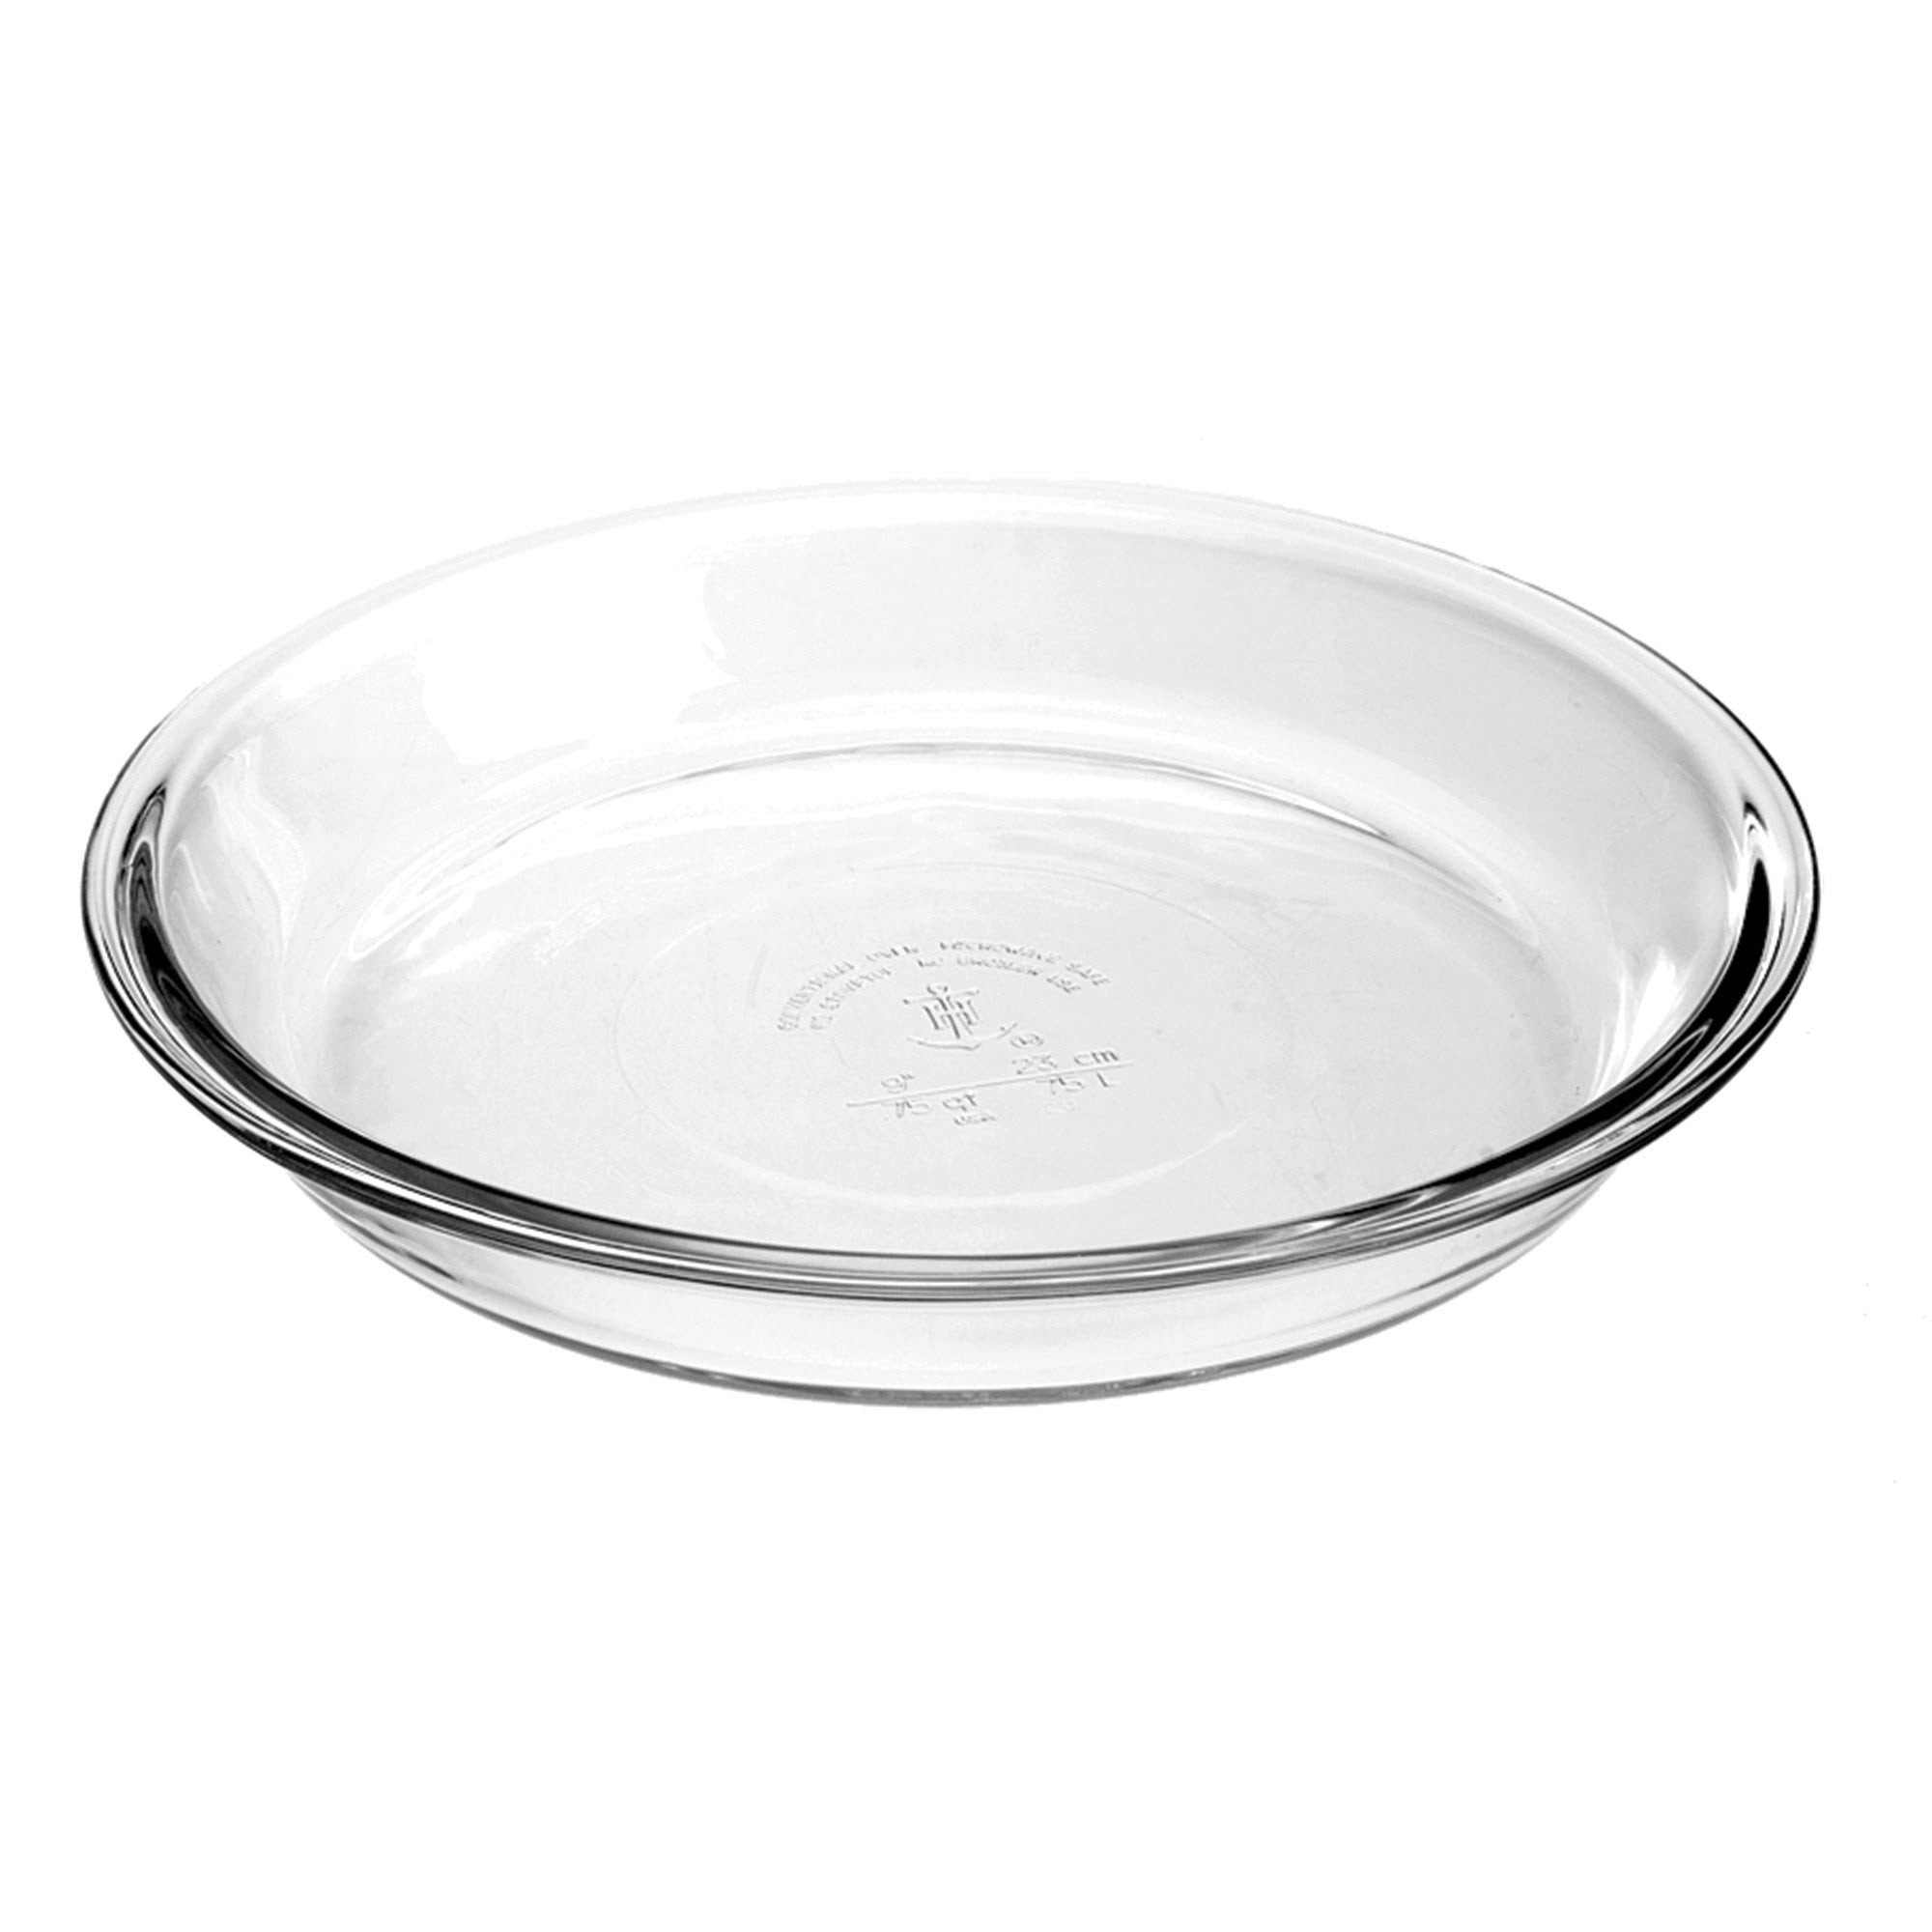 Anchor Hocking Oven Basics Pie Plate